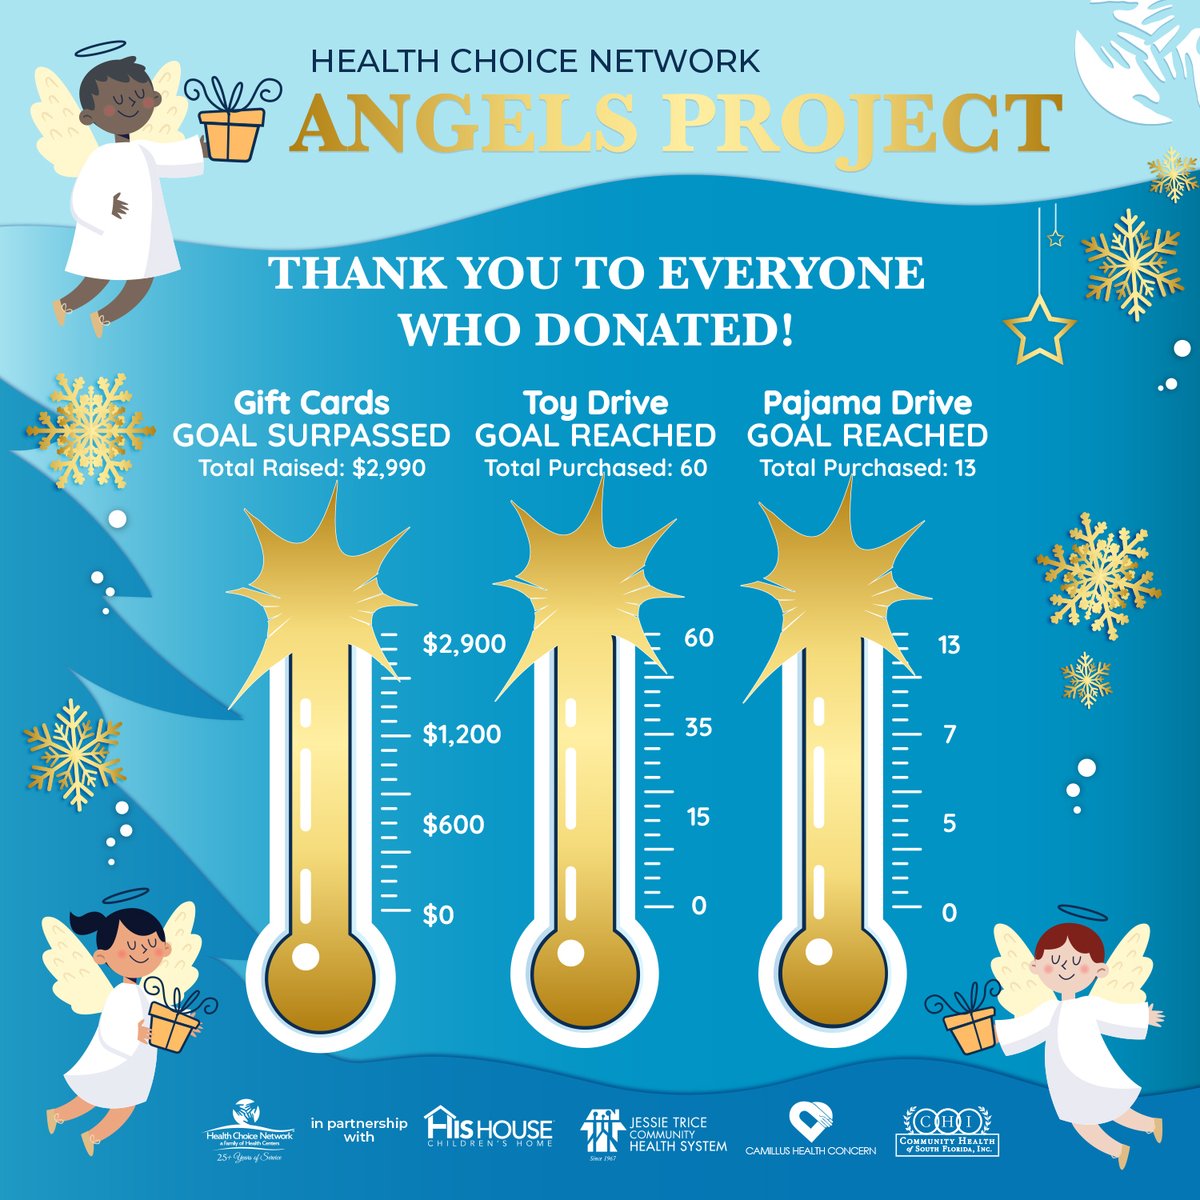 THANK YOU to everyone who supported the #HCN Angels Project. HCN was able to provide #toys for the @JessieTriceCHS, Camillus Health Concern, and @CHISouthFl #holidayevents, gift pajamas to the children at @HisHouseMiami, AND sponsor a His House Christmas dinner for the children.